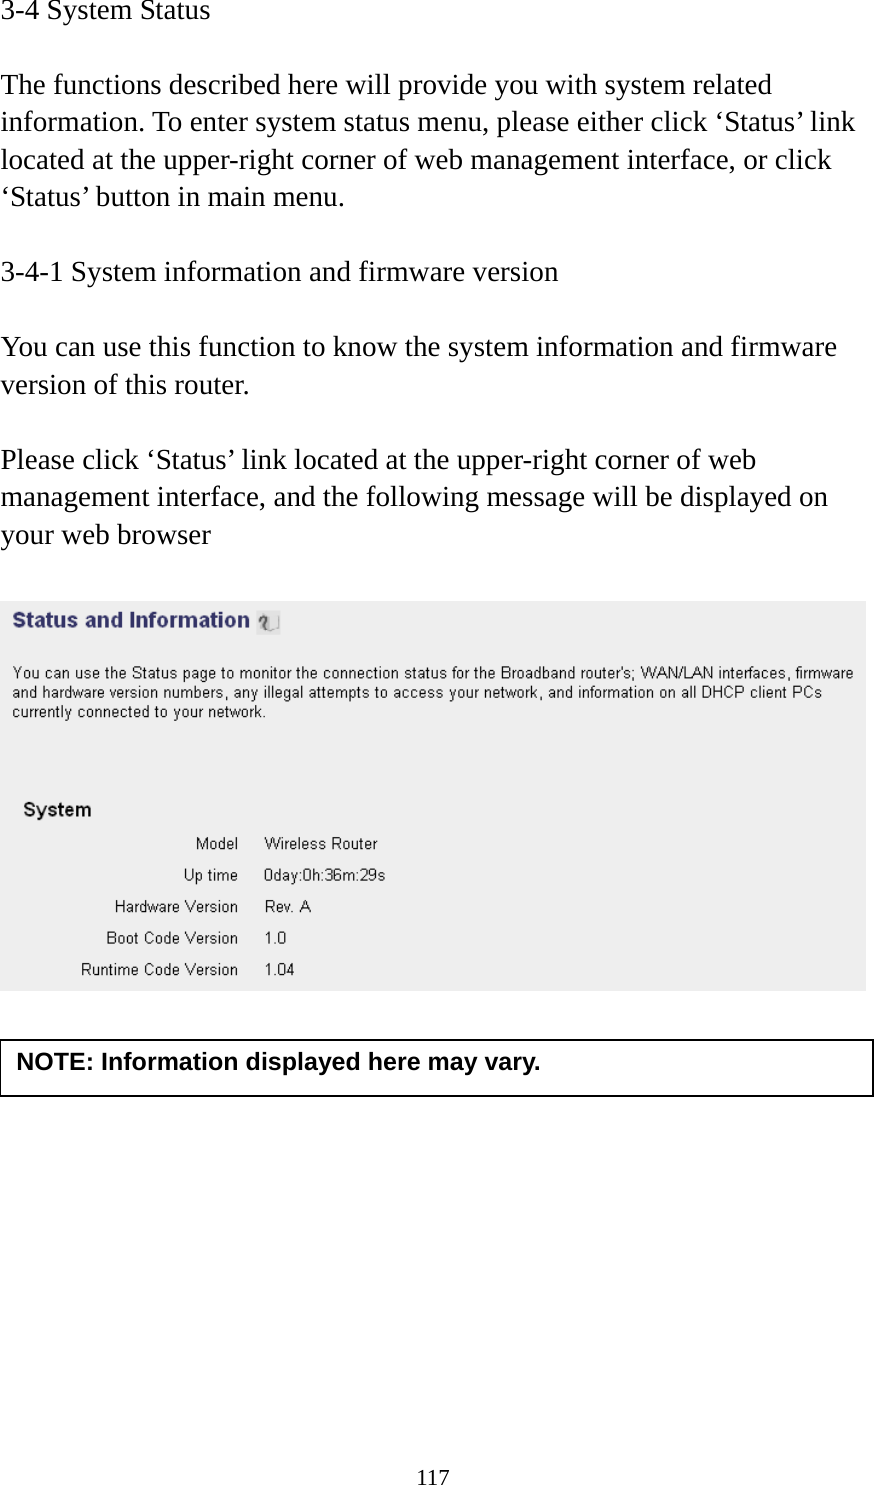 117 3-4 System Status  The functions described here will provide you with system related information. To enter system status menu, please either click ‘Status’ link located at the upper-right corner of web management interface, or click ‘Status’ button in main menu.  3-4-1 System information and firmware version  You can use this function to know the system information and firmware version of this router.  Please click ‘Status’ link located at the upper-right corner of web management interface, and the following message will be displayed on your web browser              NOTE: Information displayed here may vary. 